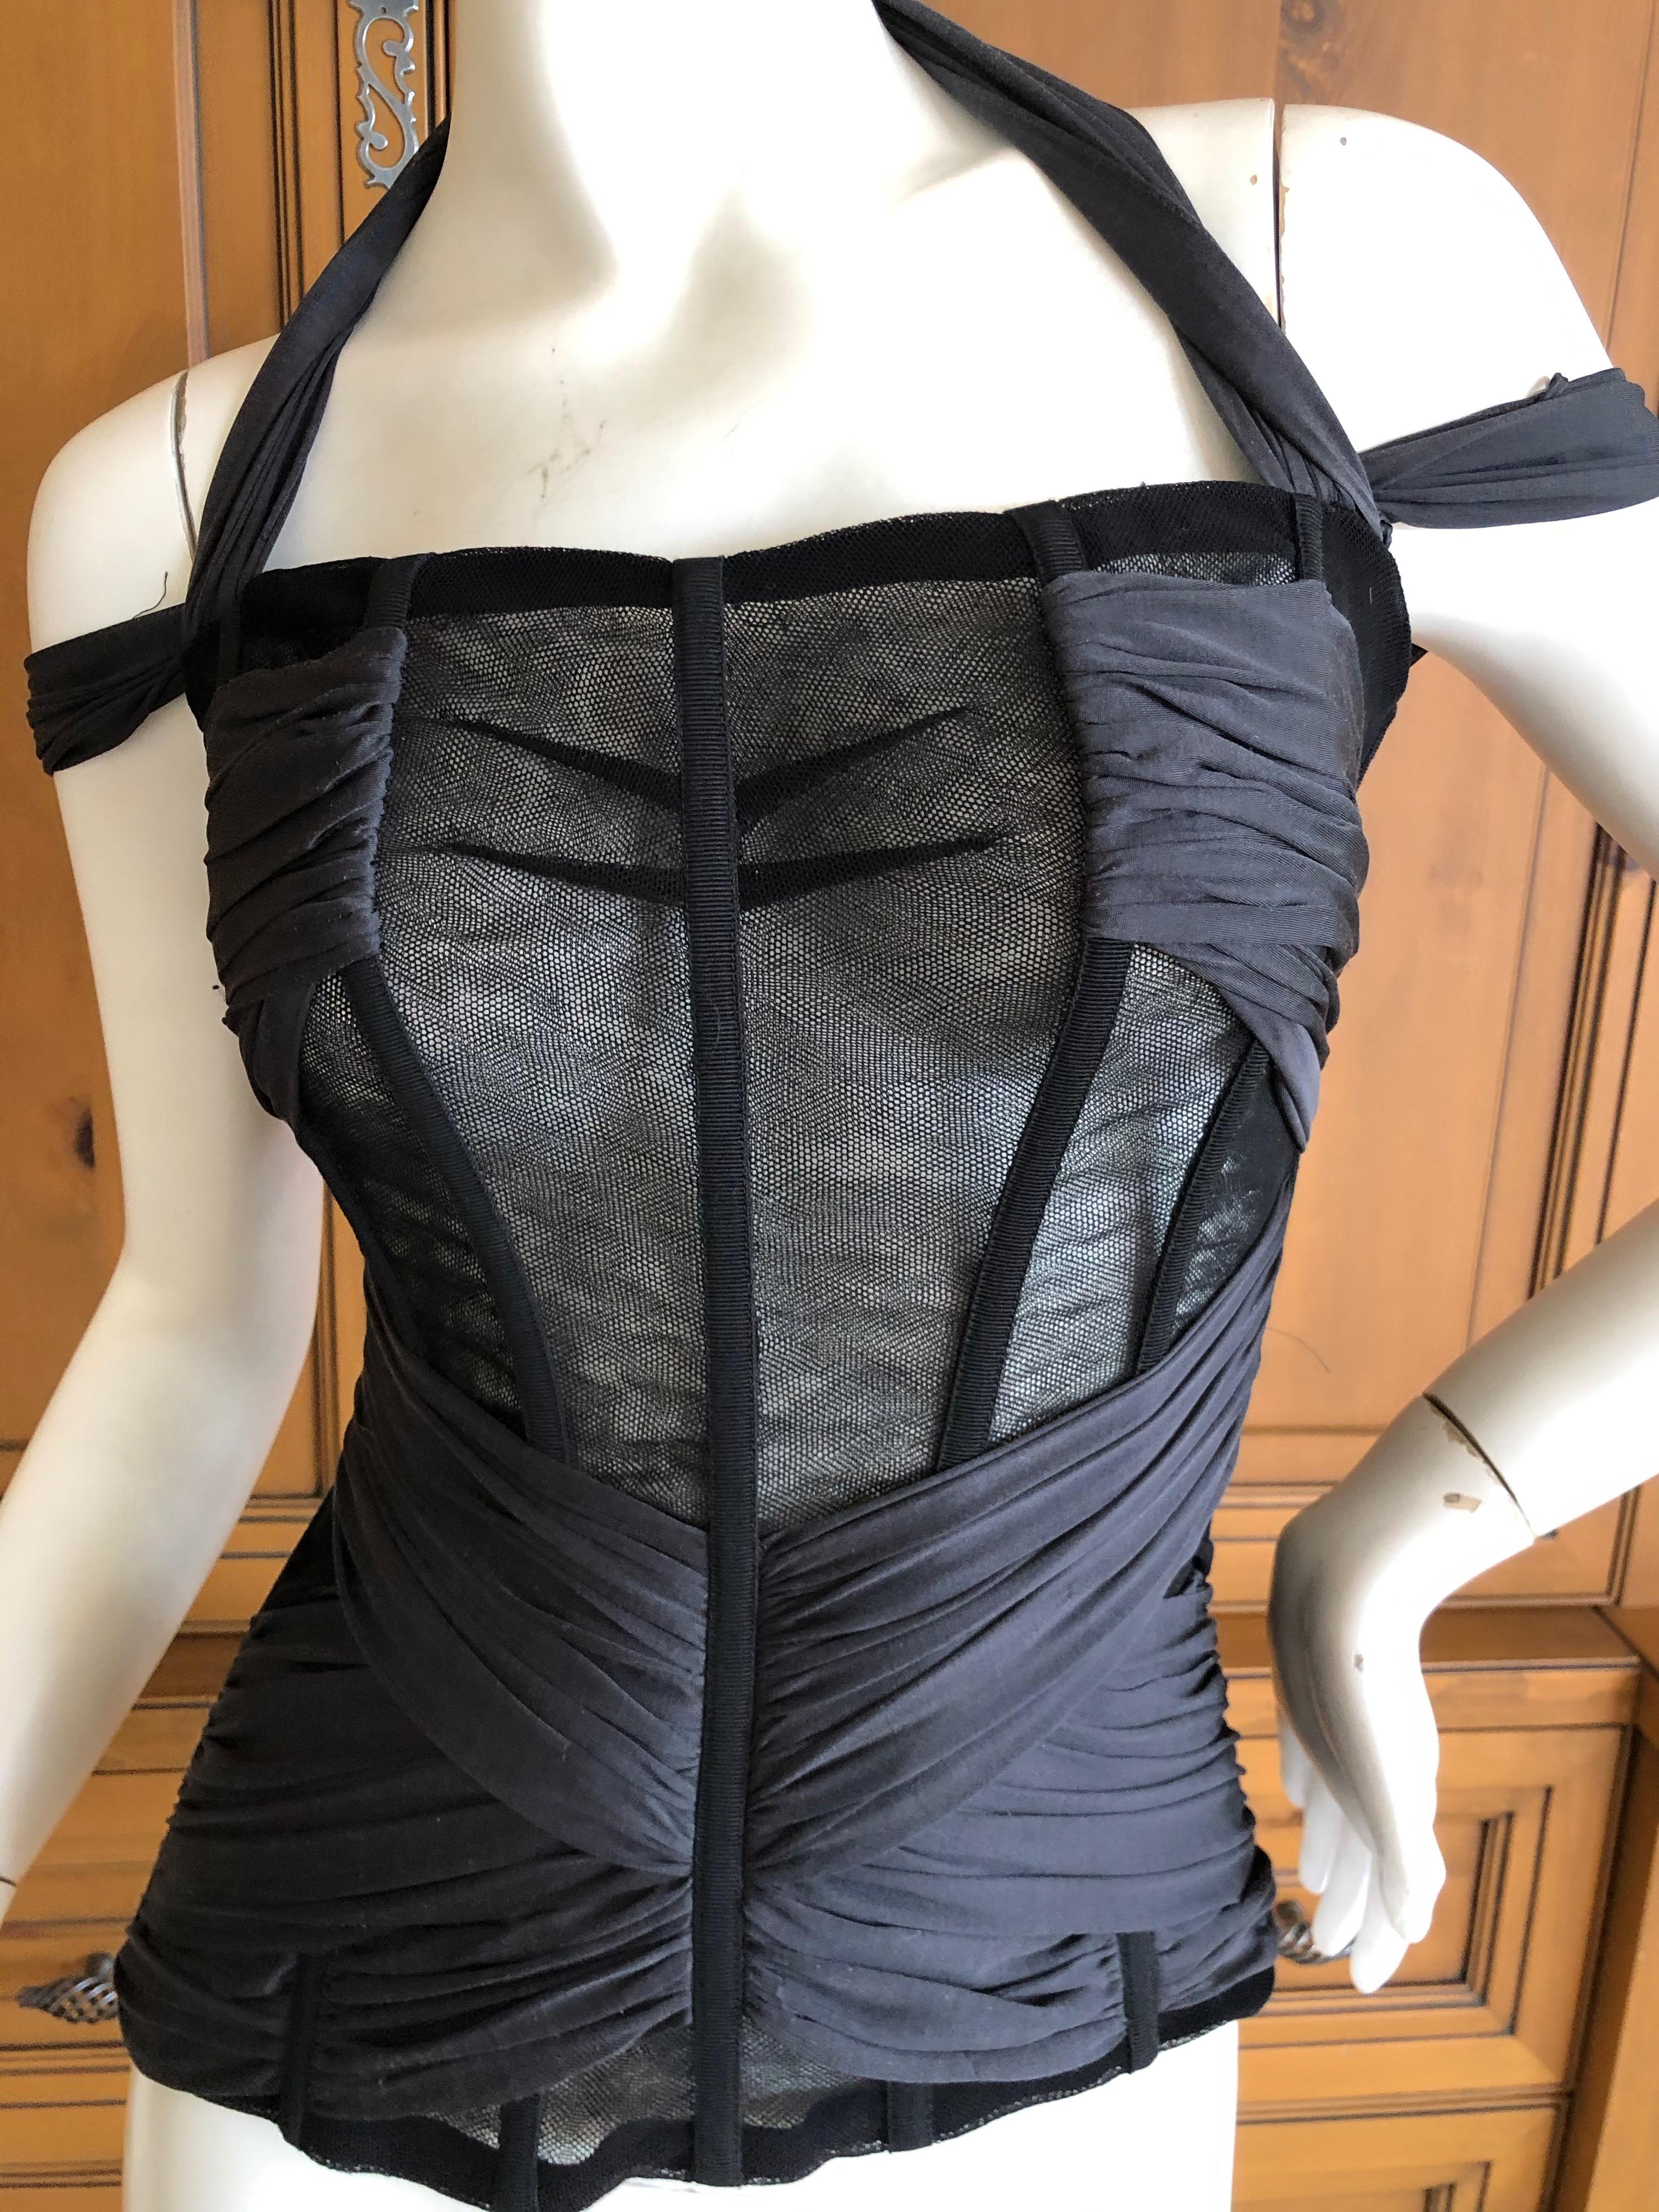 Dolce & Gabbana Sexy Vintage Sheer Black Net Corset with Gathered Details 
Size 42, there is a lot of strech
 Bust 34'
Waist 26